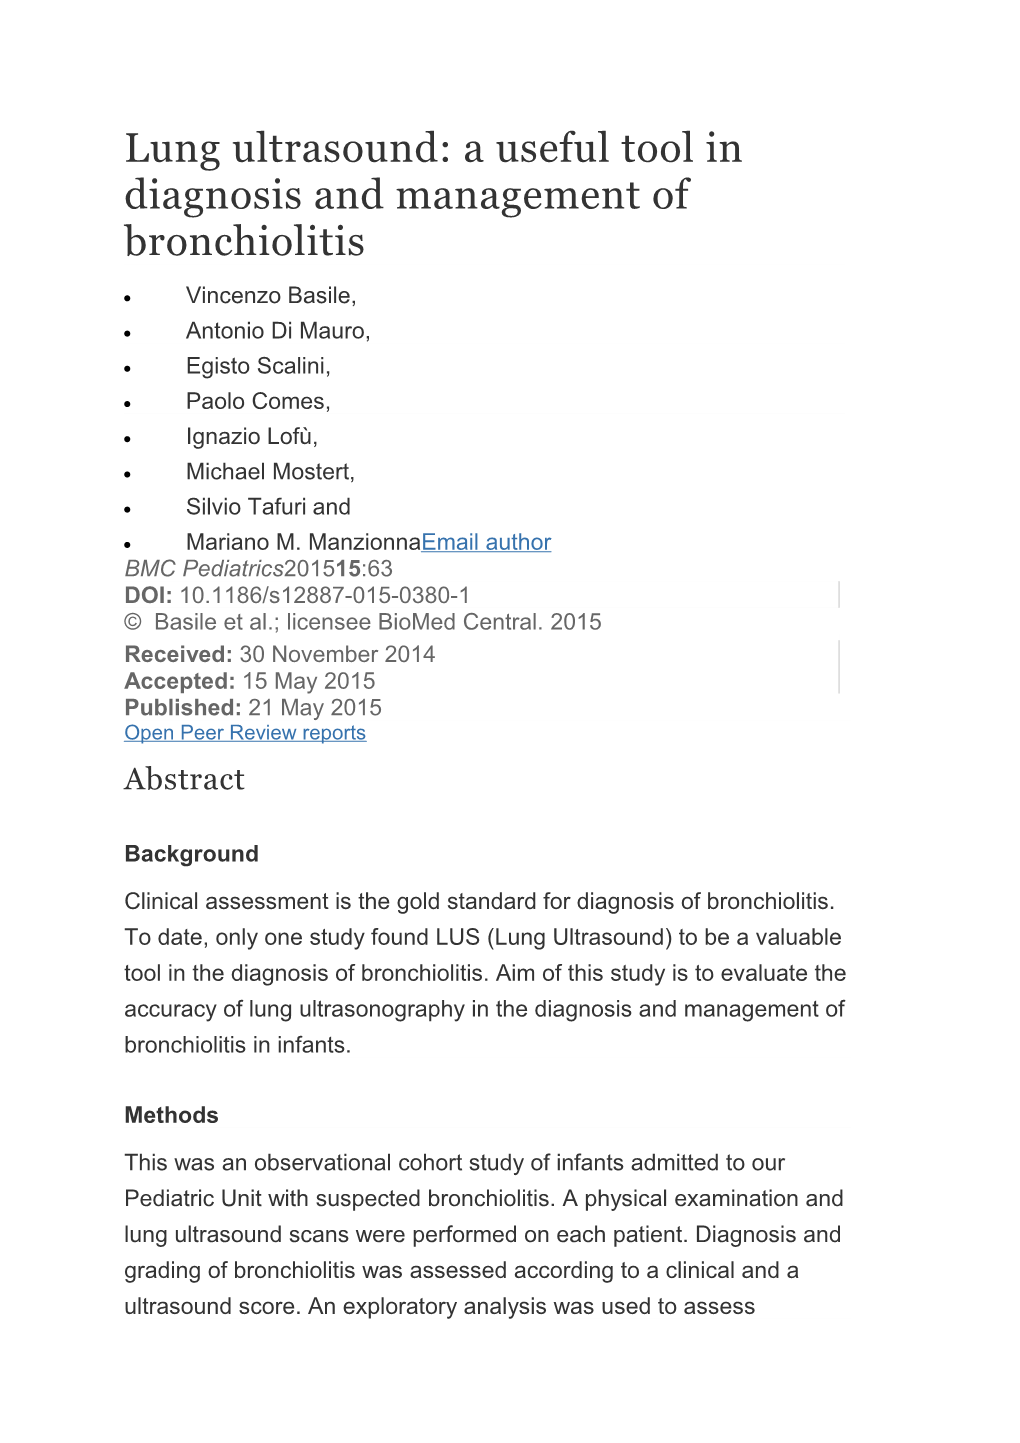 Lung Ultrasound: a Useful Tool in Diagnosis and Management of Bronchiolitis